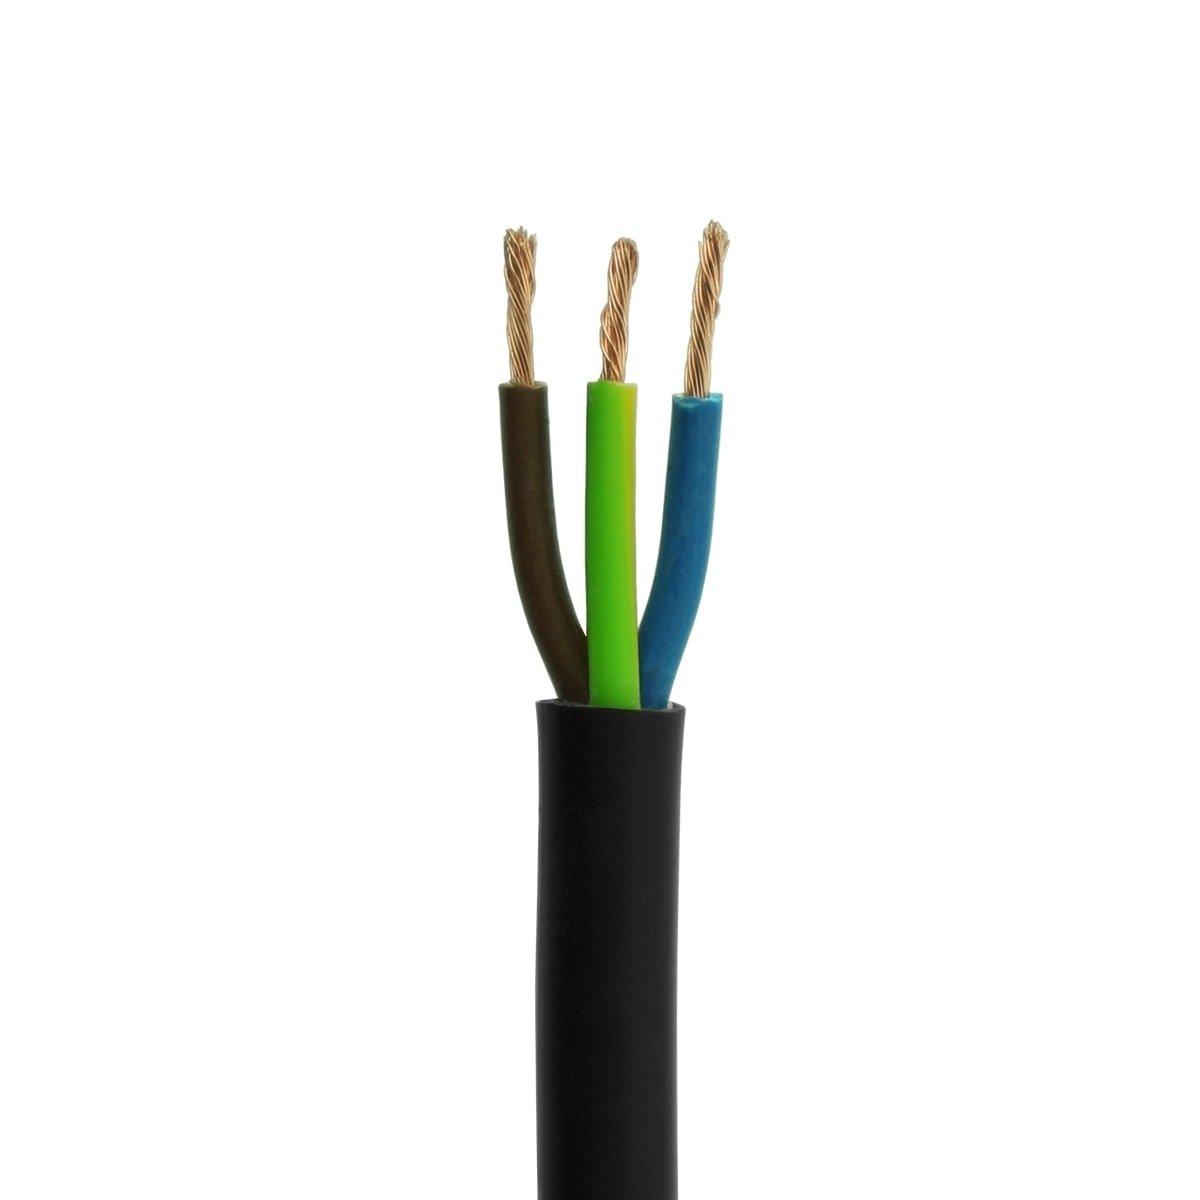 Outdoor Lighting Connection material Power cable 3 x 0.75 mm2 VMVL - 5 m